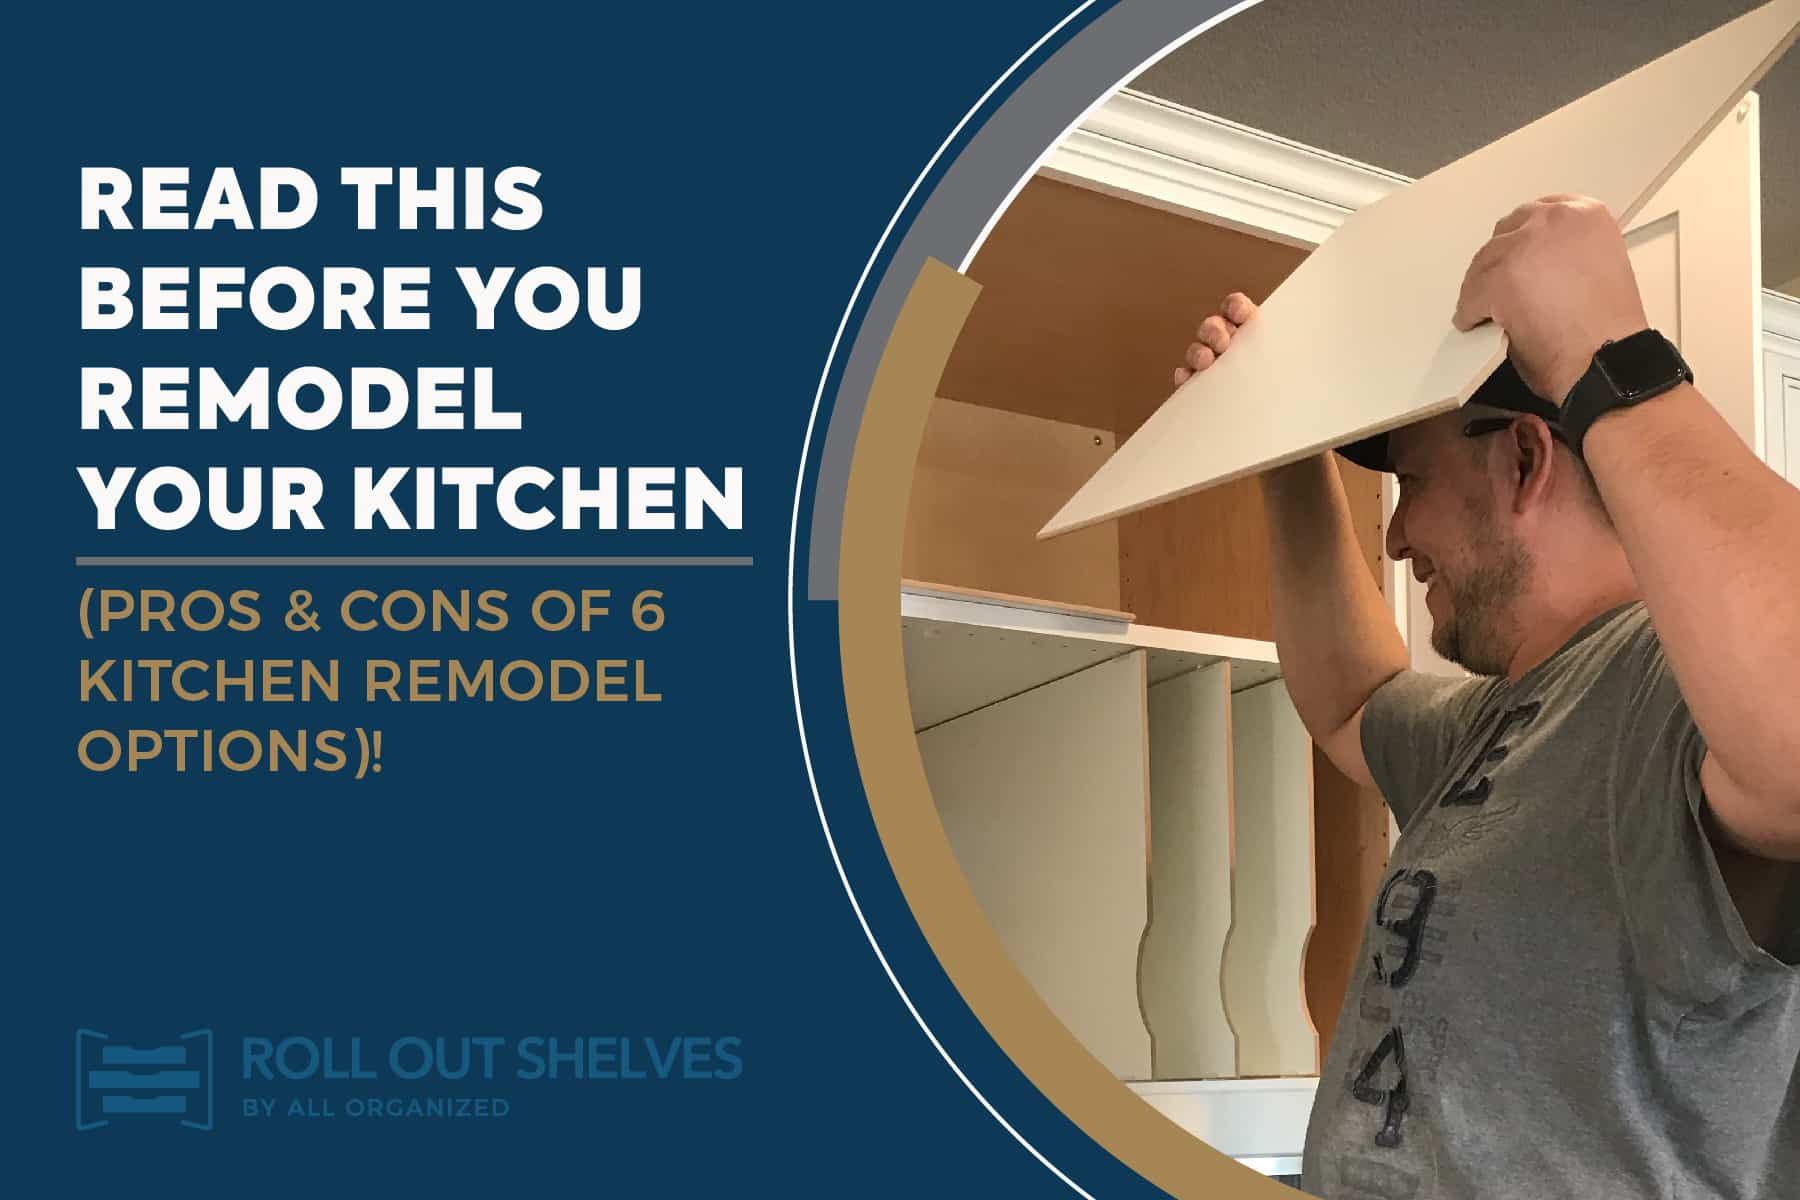 Read This Before You Remodel Your Kitchen (pros & cons of 6 kitchen remodel options)! 13